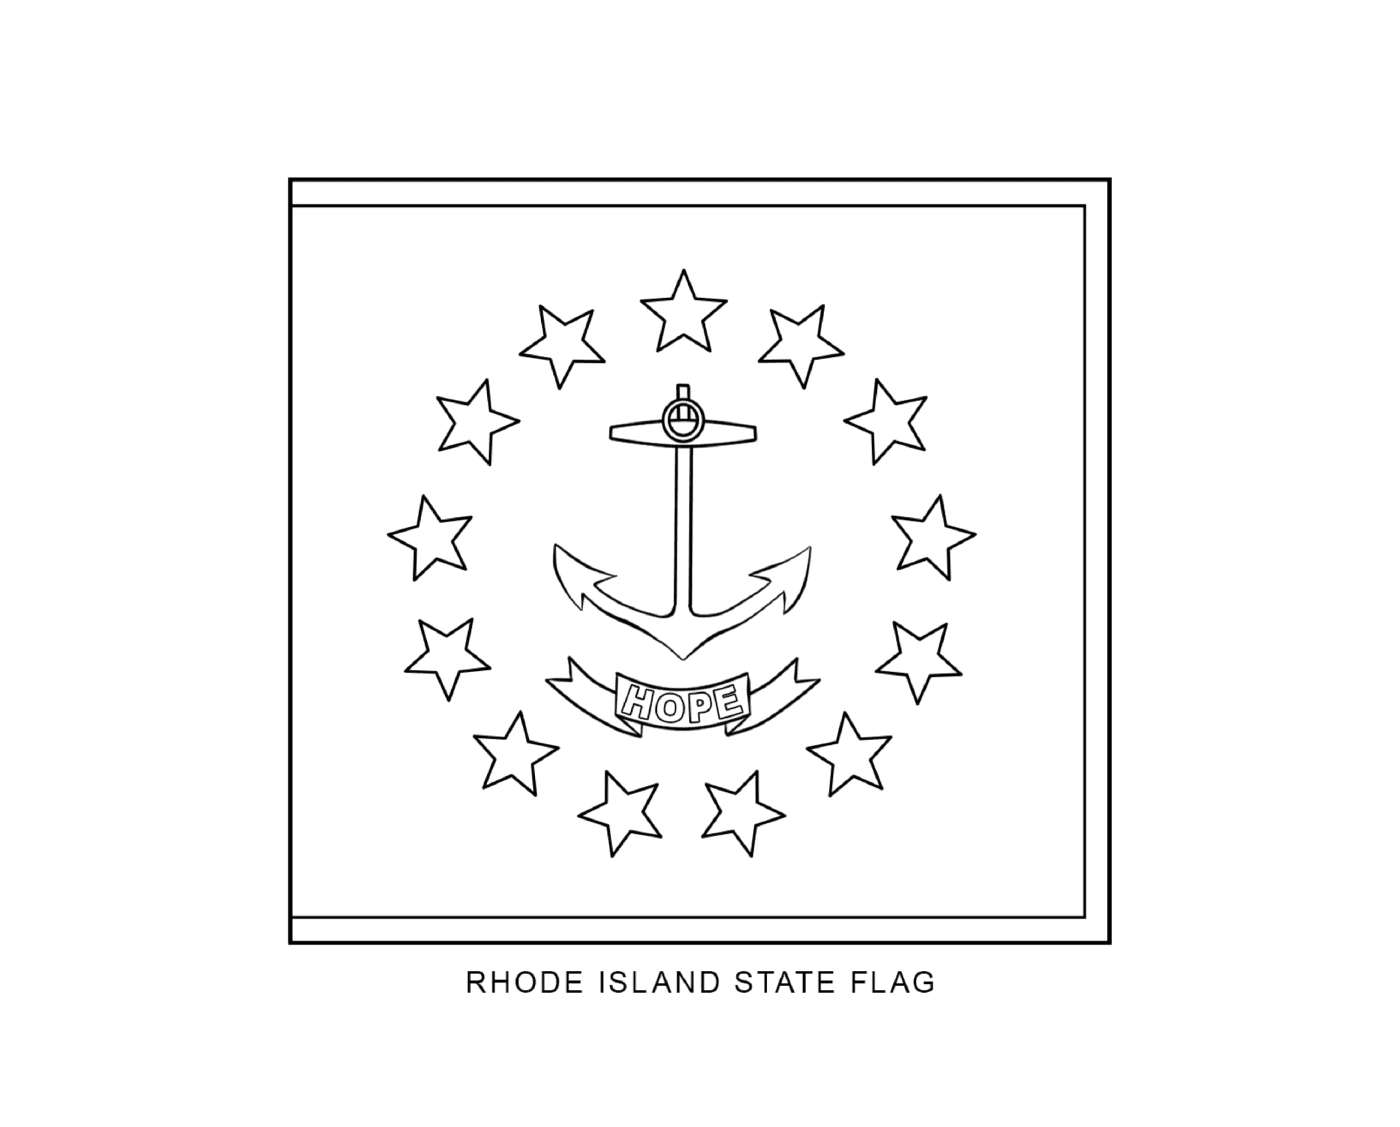  Flagge des Staates Rhode Island 